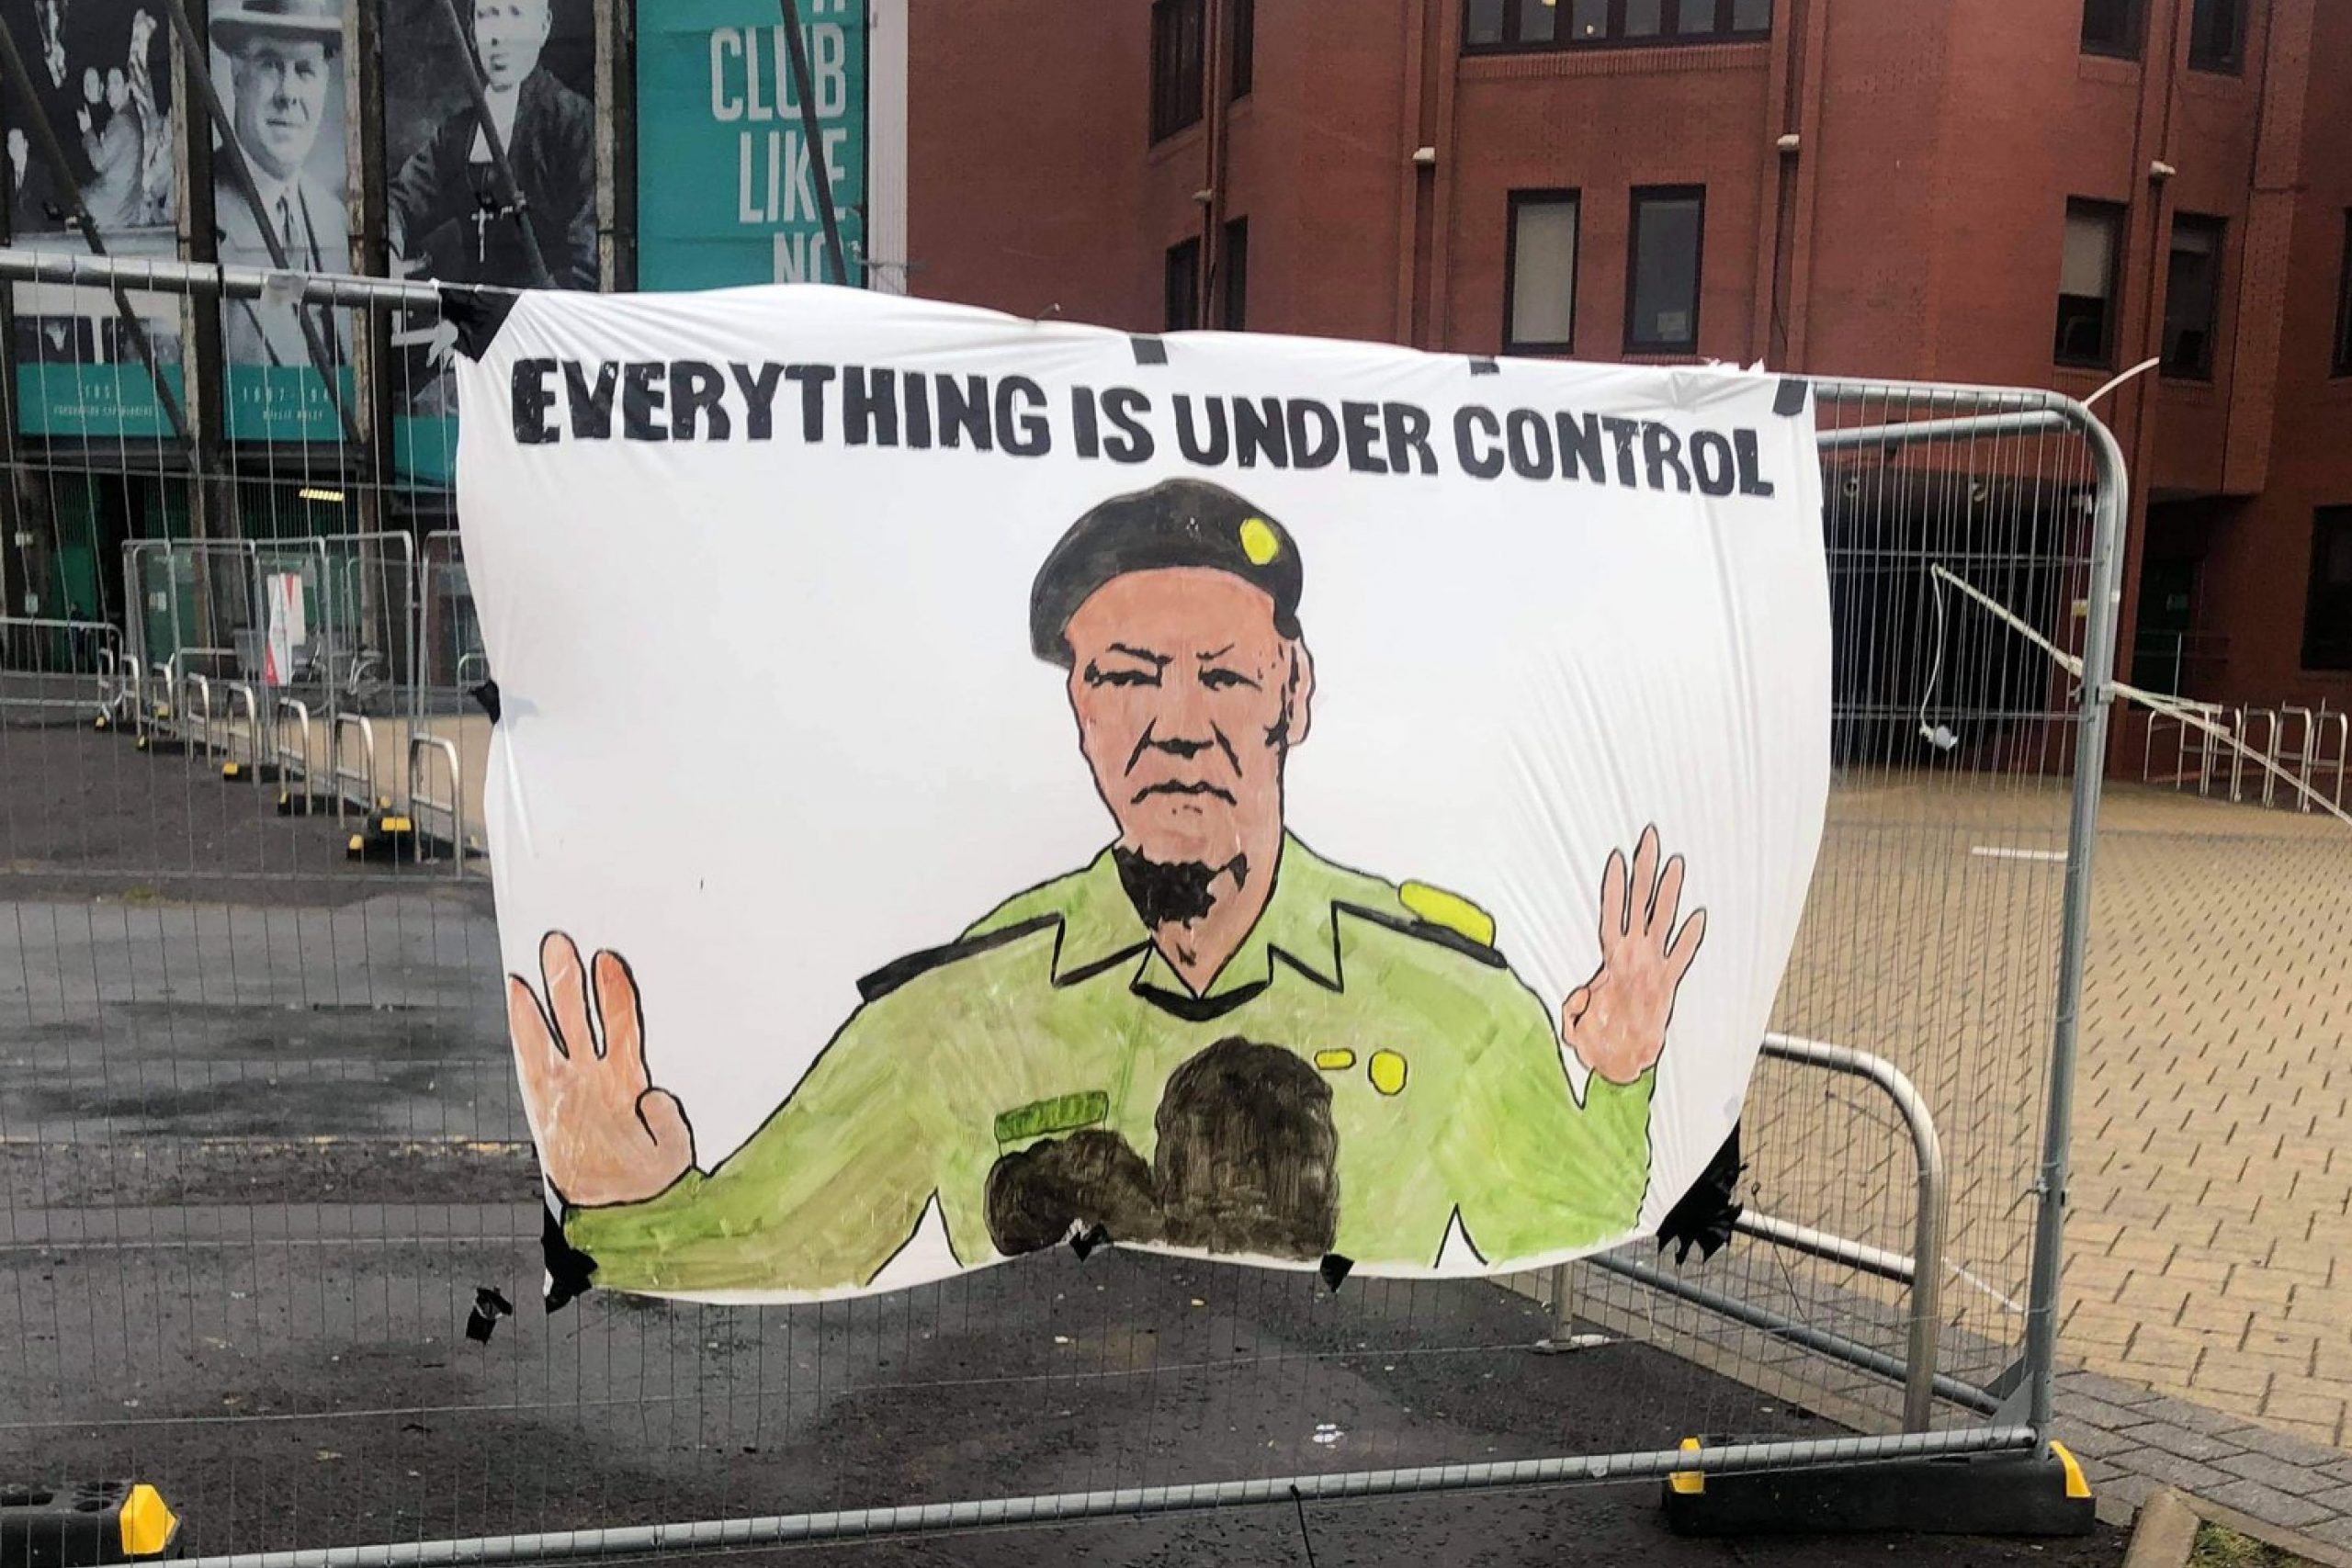 Celtic fans liken Peter Lawwell to Saddam Hussein’s propaganda minister as new banner goes up outside Parkhead